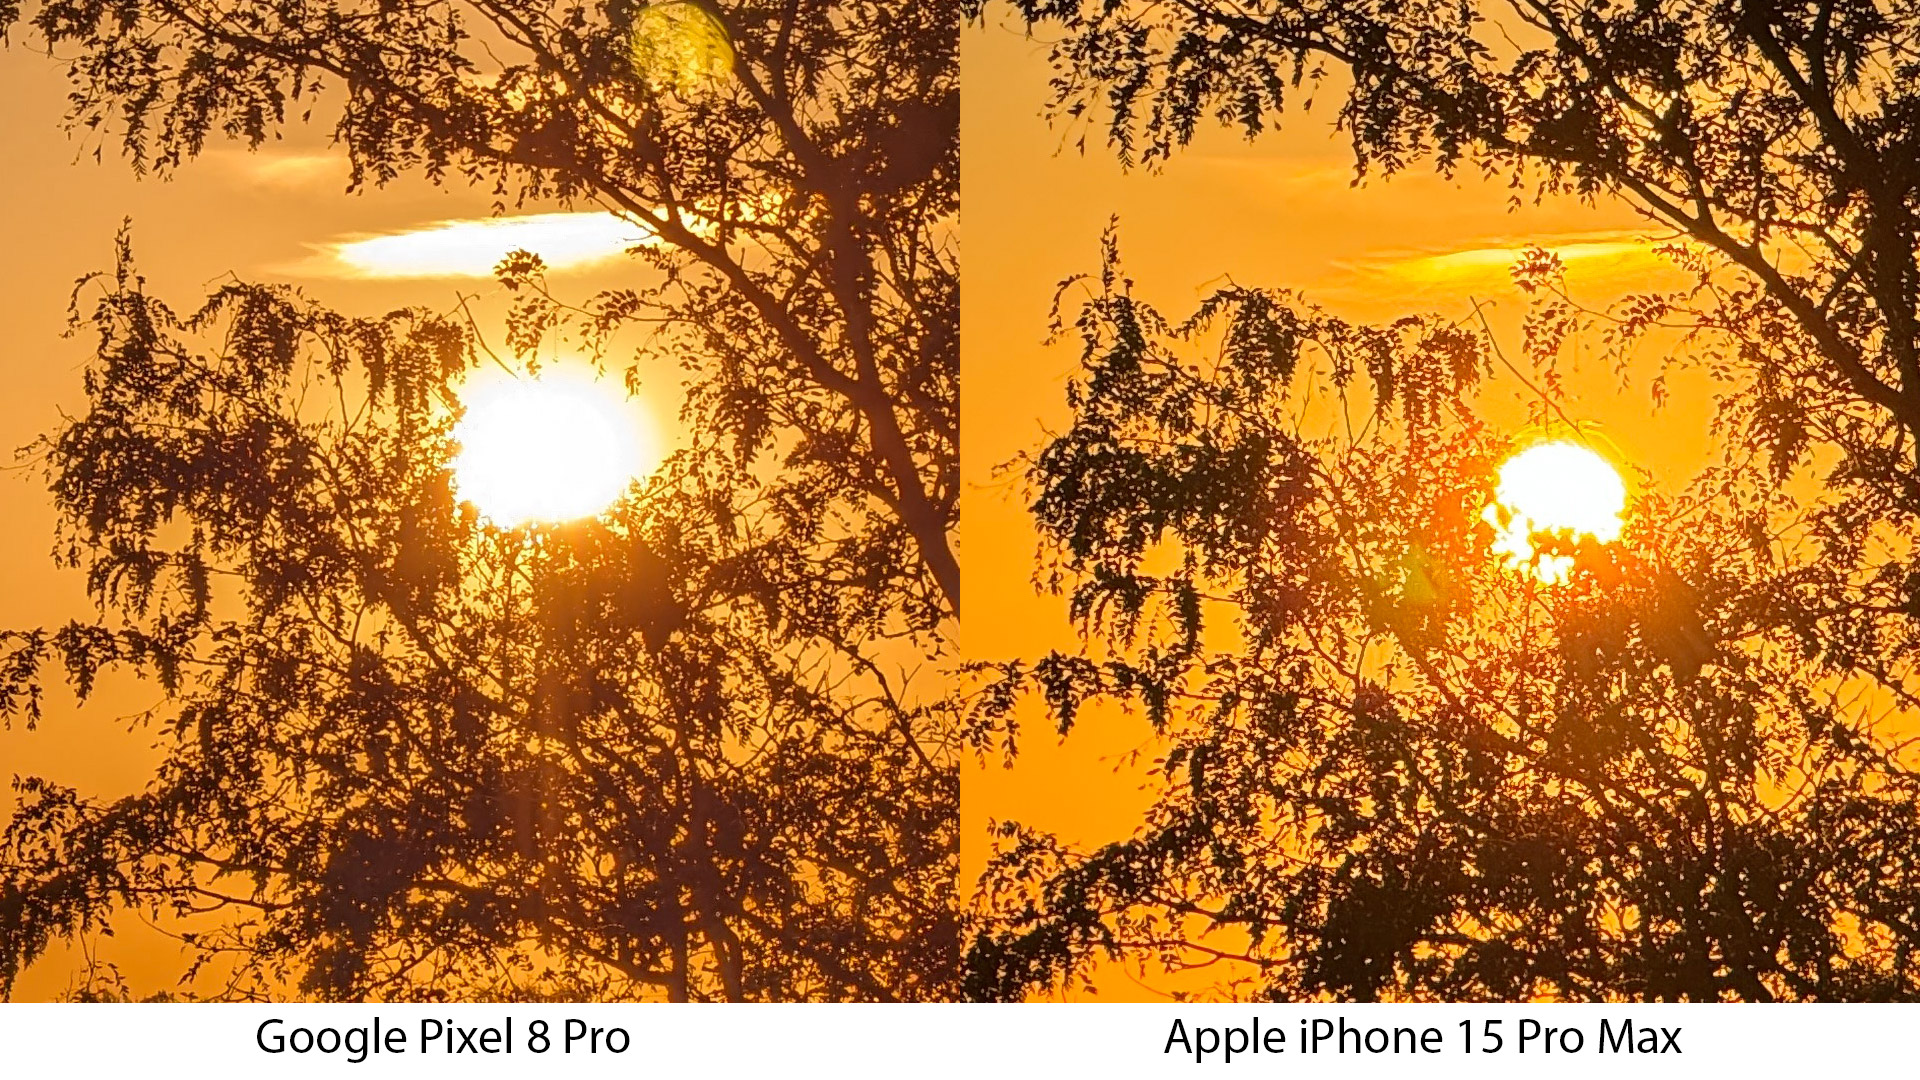 Pixel 8 Pro vs iPhone 15 Pro Max 5Xx zoom test - cropped images